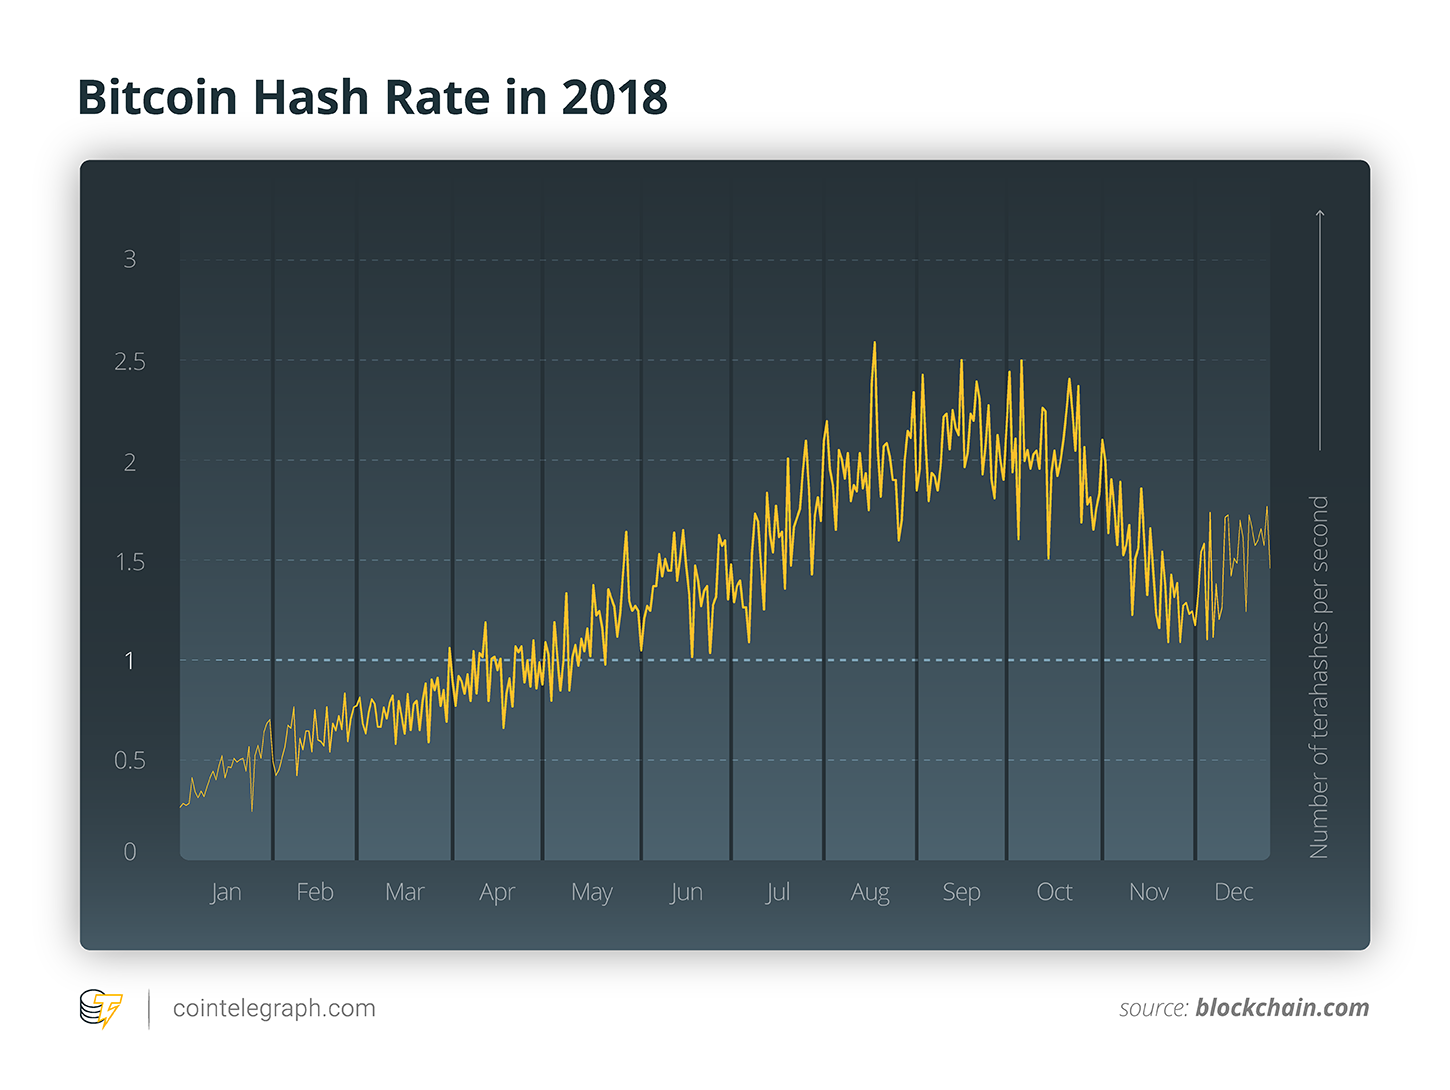 Bitcoin Hash Rate in 2018